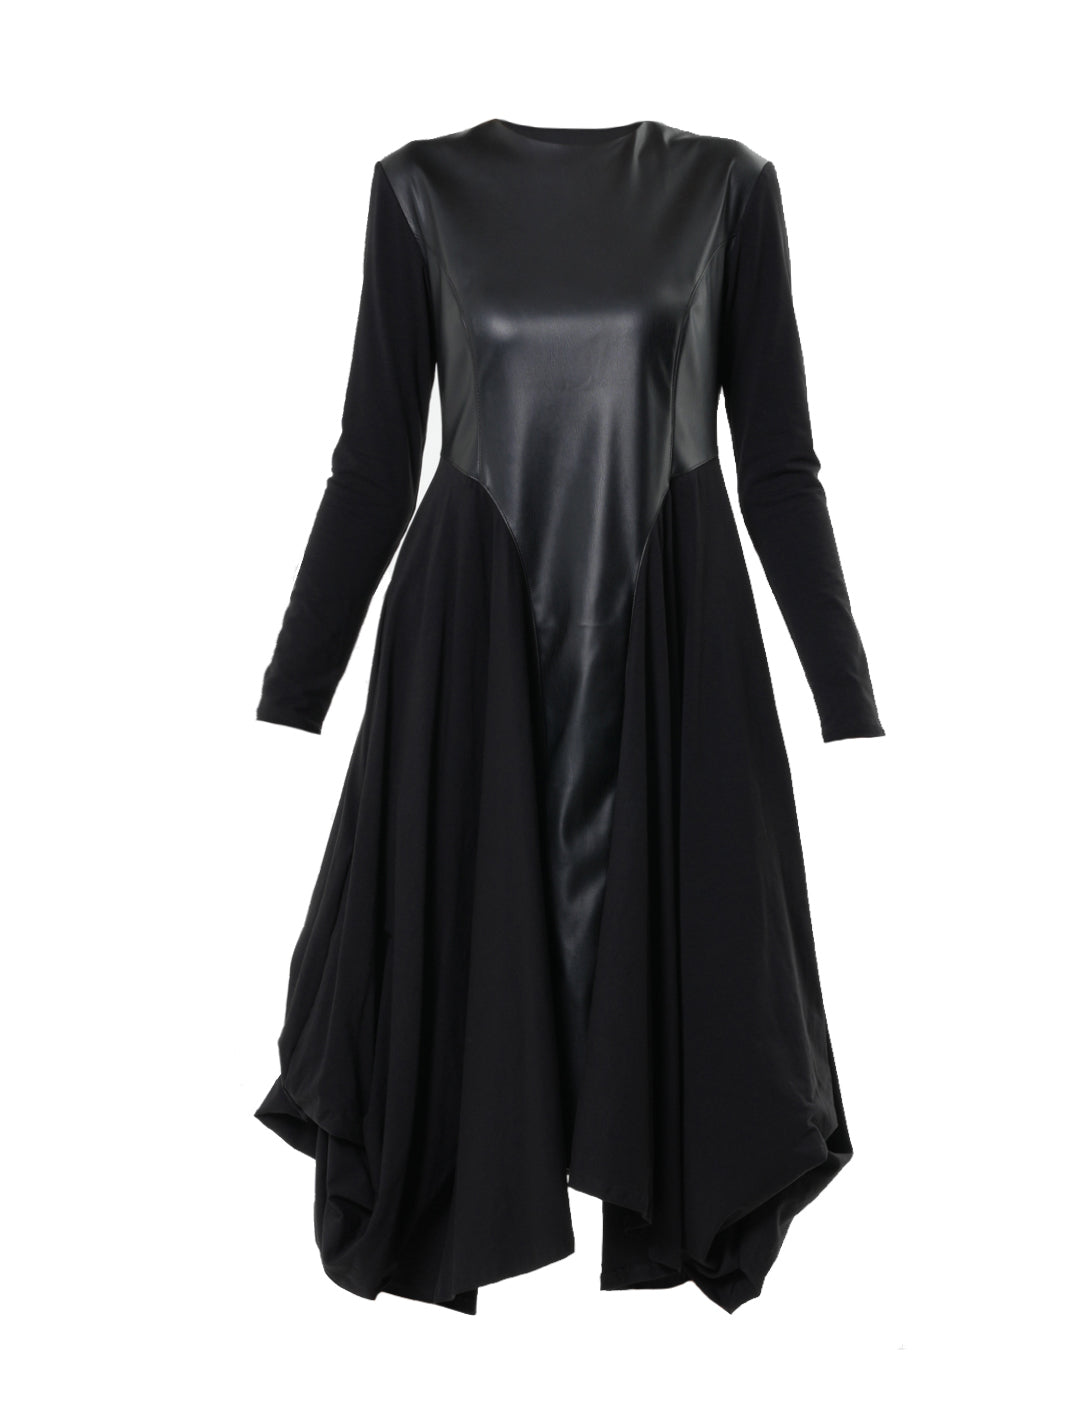 Long Sleeve Dress With Vegan Leather Front